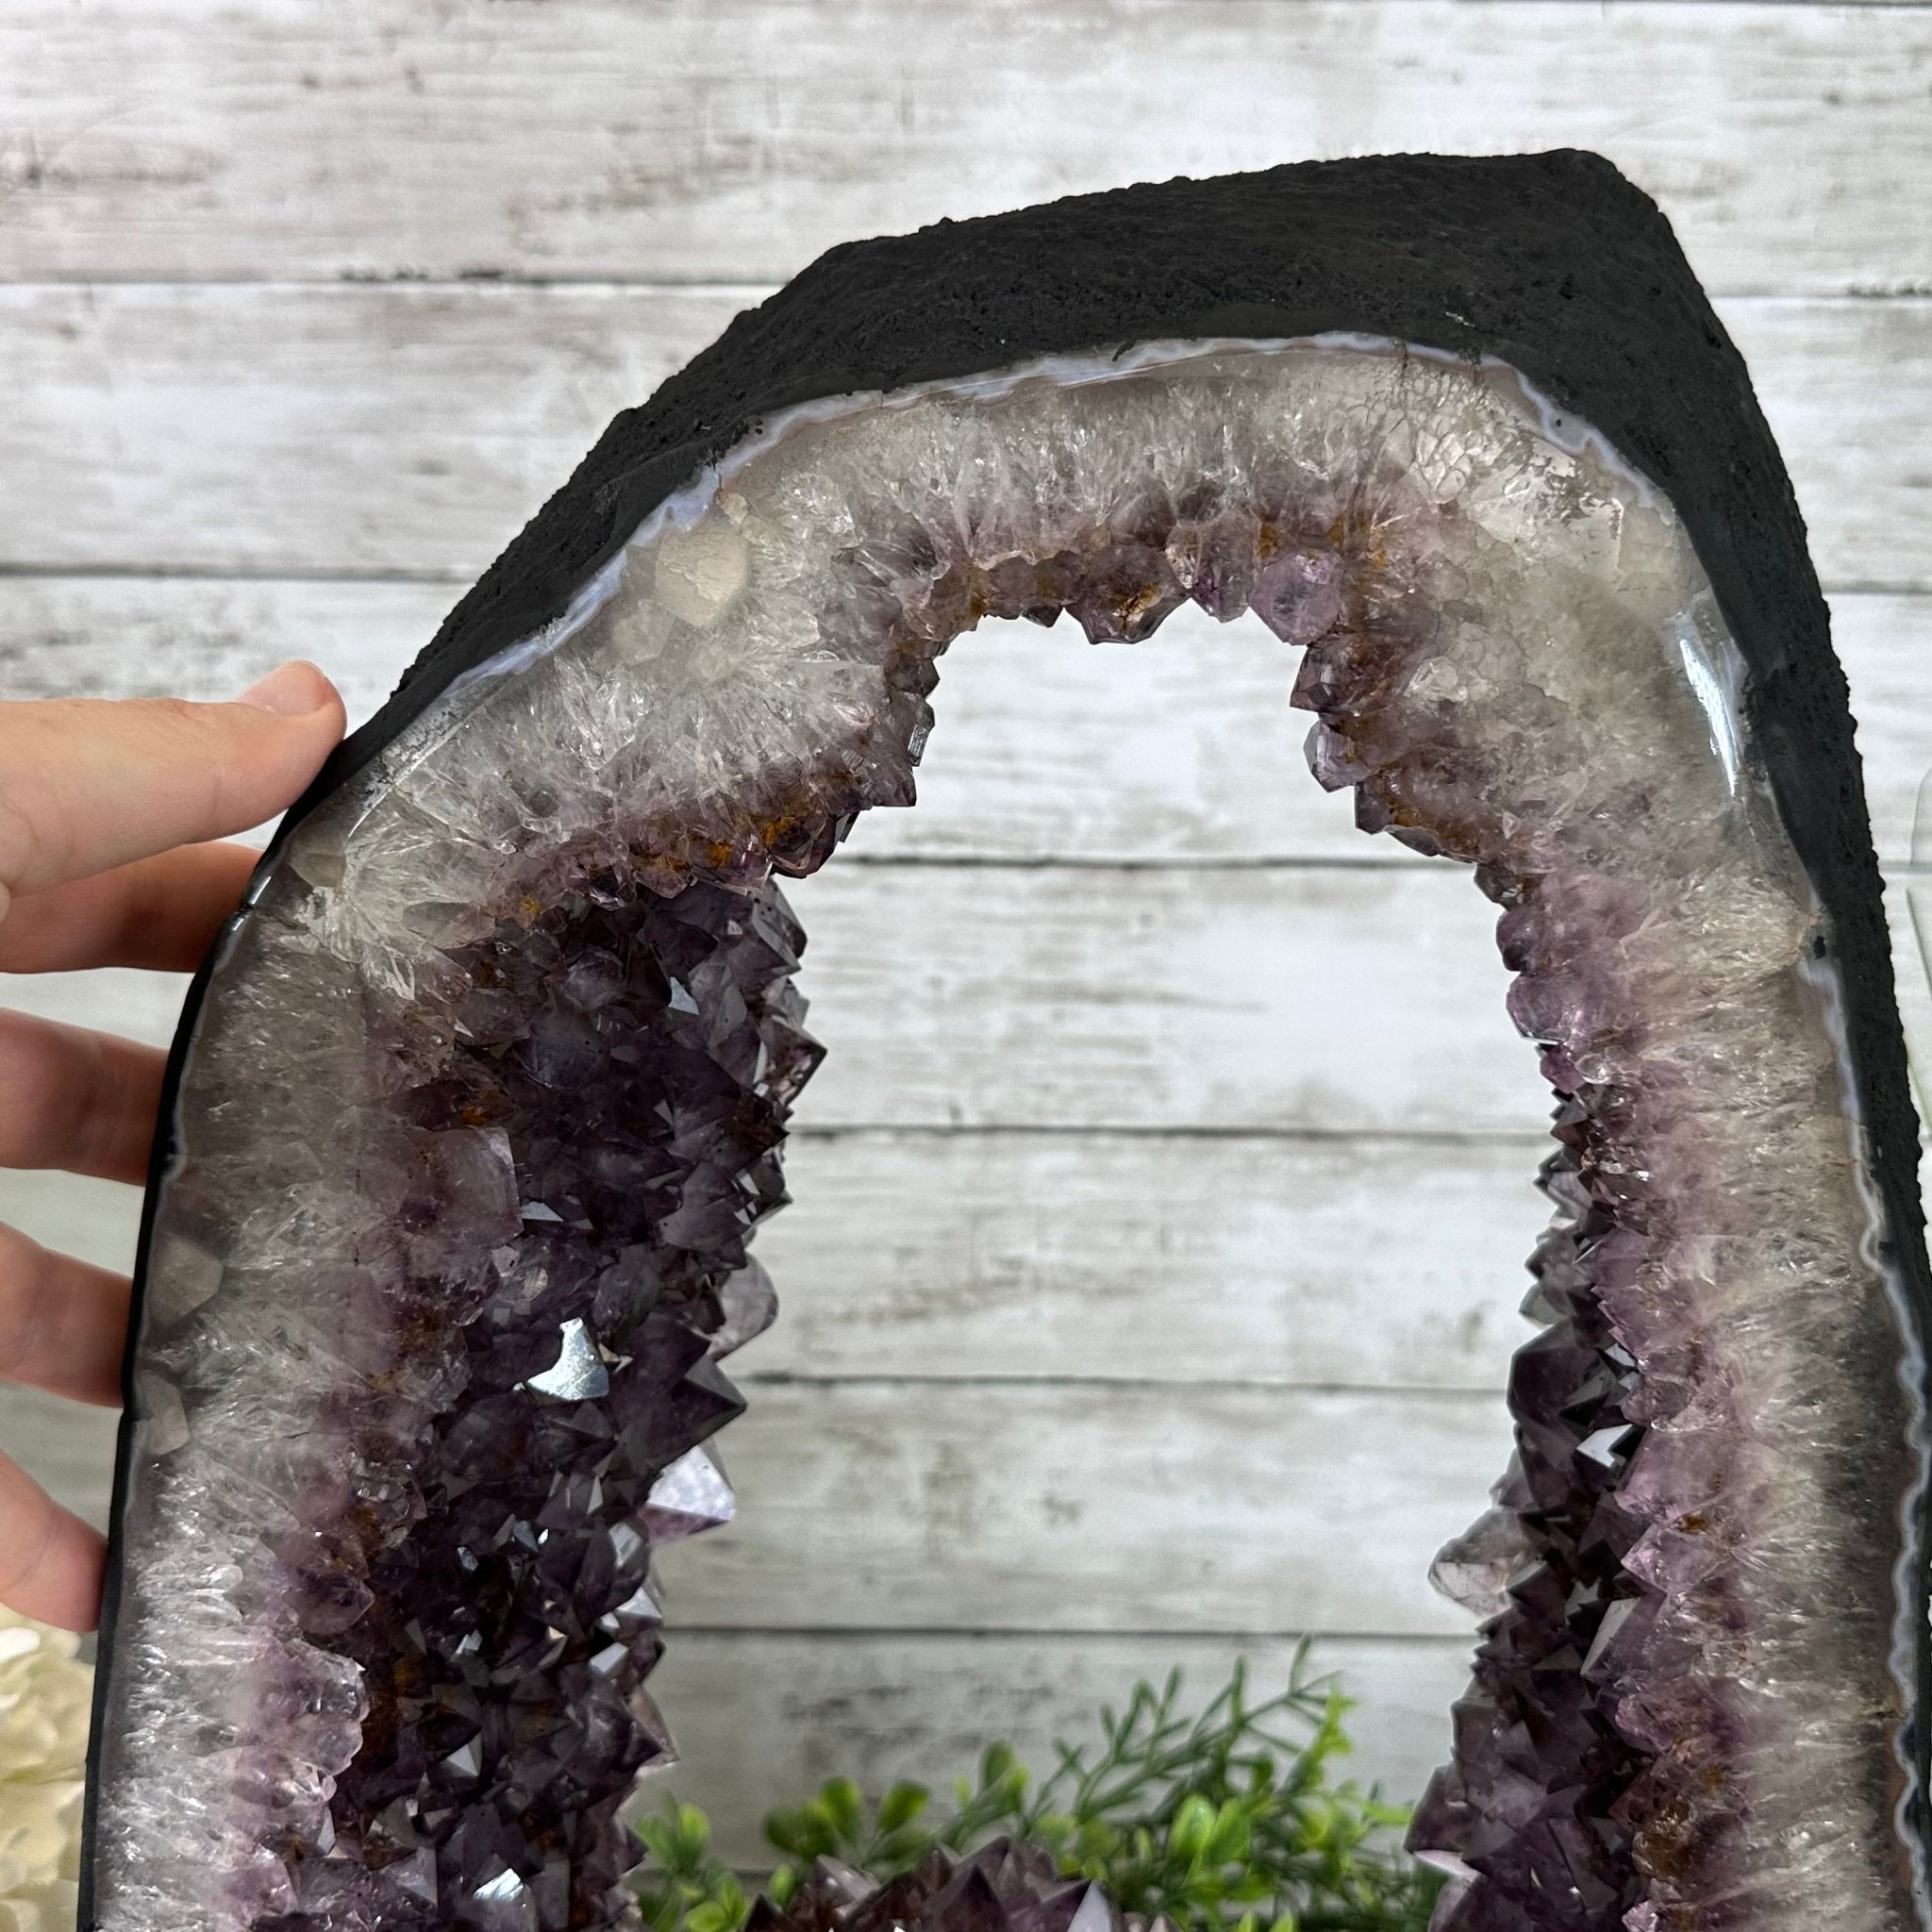 Extra Quality Open 2-Sided Brazilian Amethyst Cathedral, 29.9 lbs, 16.1" tall, Model #5605-0139 by Brazil Gems - Brazil GemsBrazil GemsExtra Quality Open 2-Sided Brazilian Amethyst Cathedral, 29.9 lbs, 16.1" tall, Model #5605-0139 by Brazil GemsOpen 2-Sided Cathedrals5605-0139